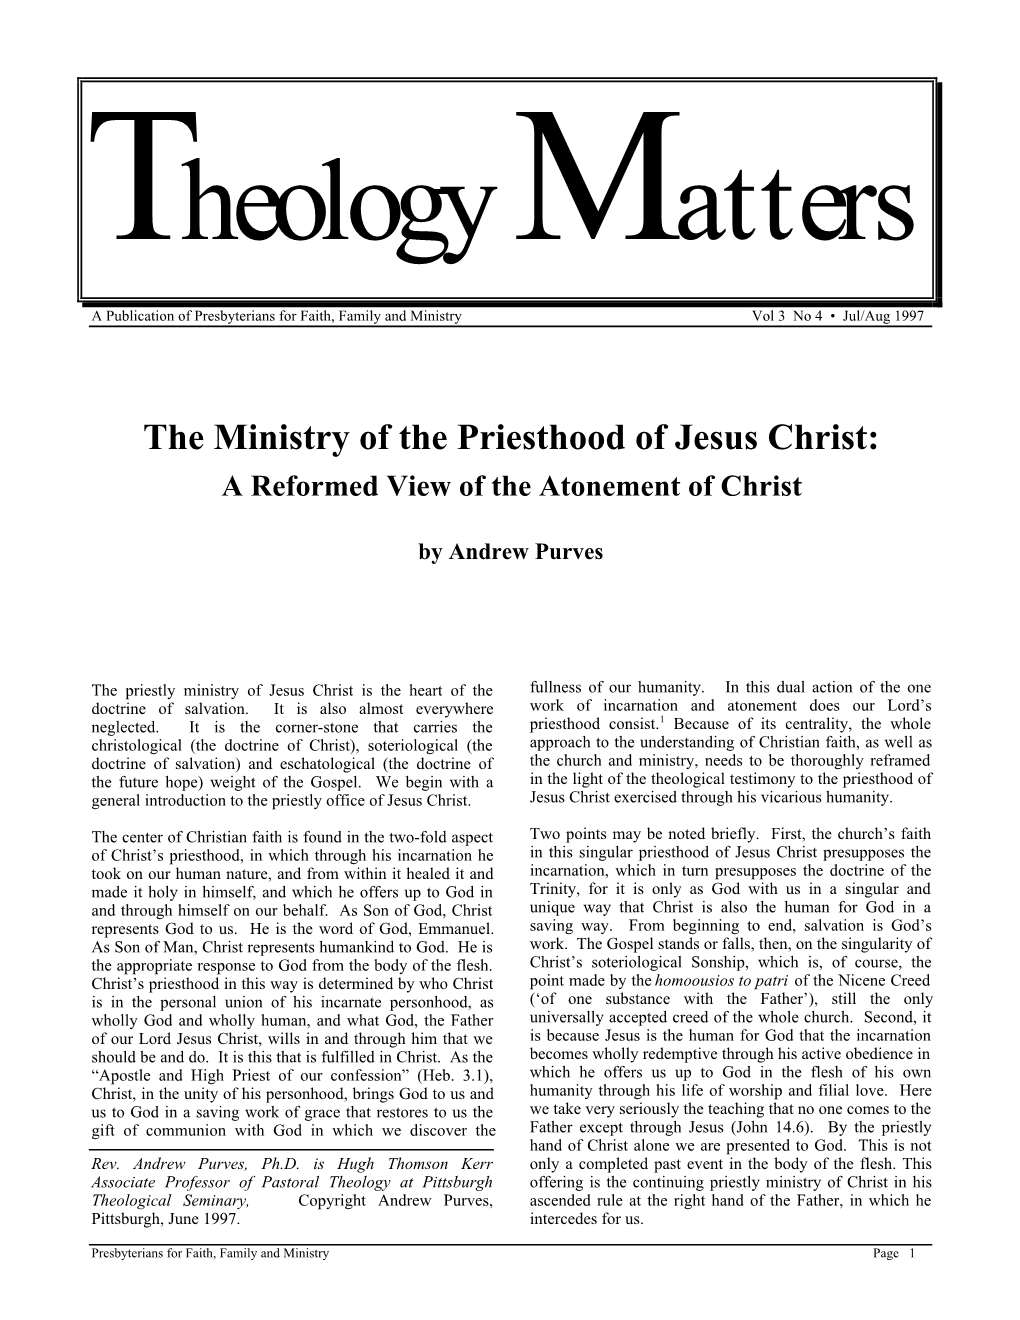 The Ministry of the Priesthood of Jesus Christ: a Reformed View of the Atonement of Christ